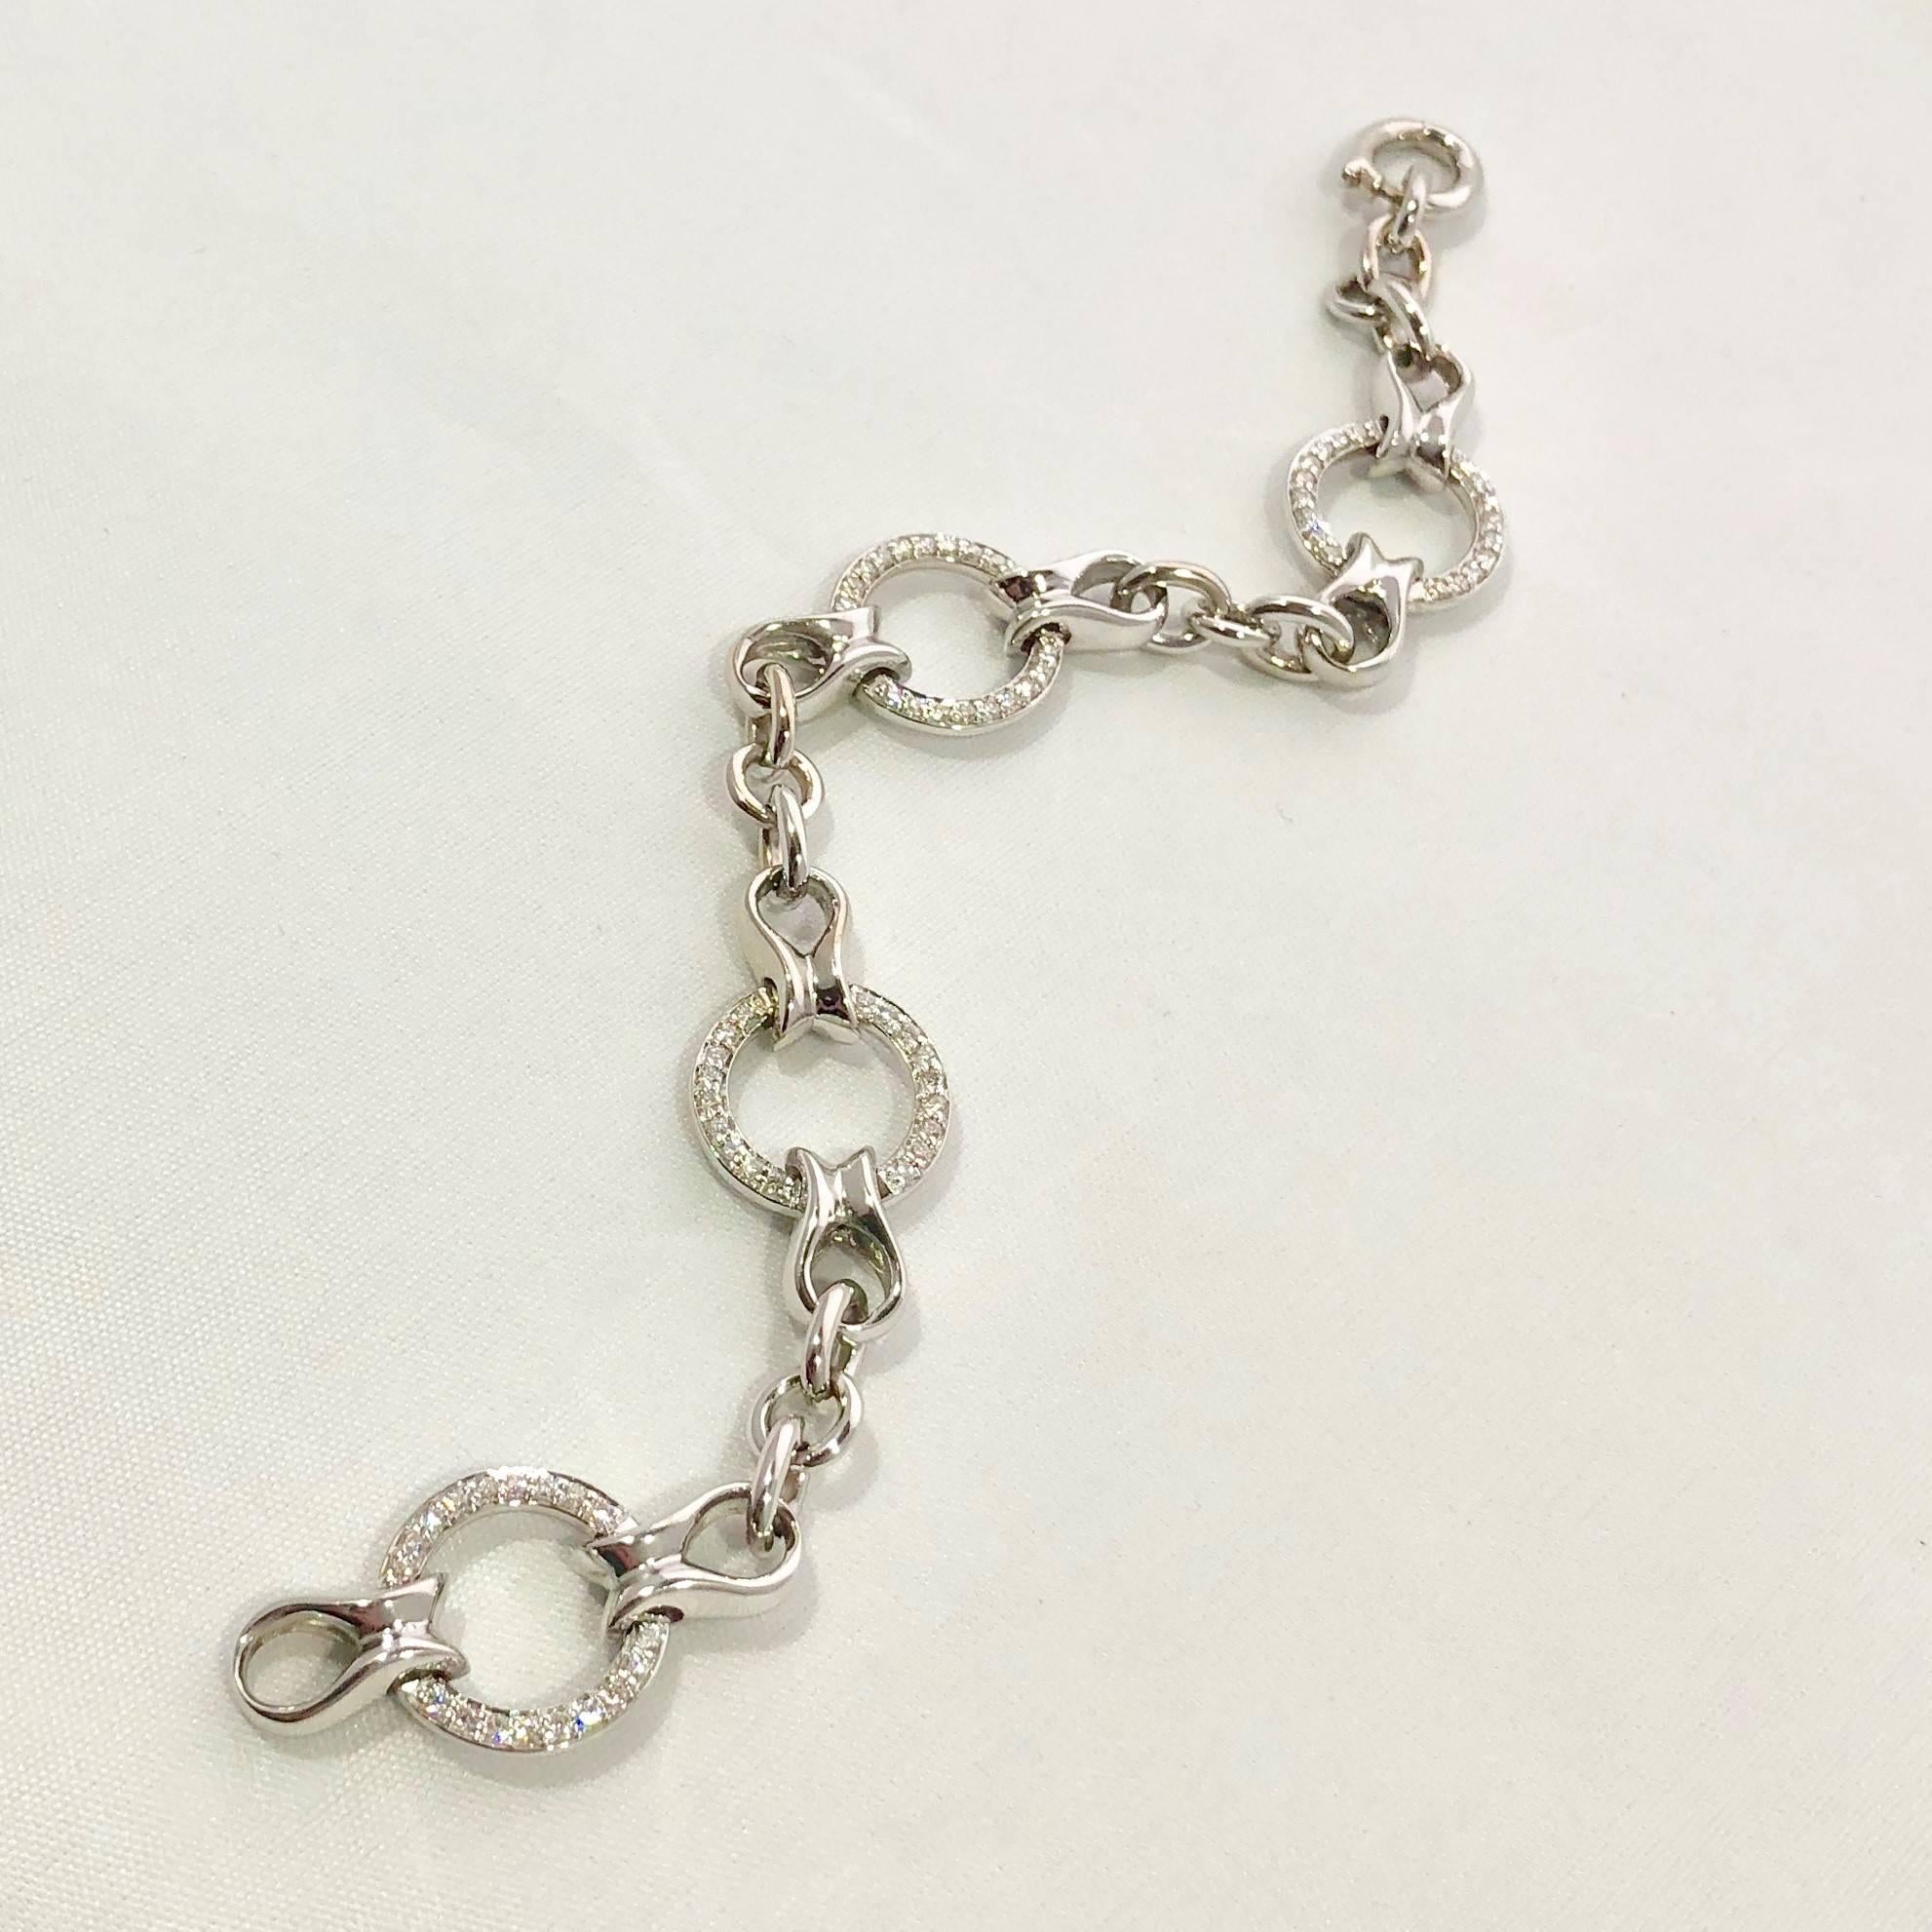 Honora 14 karat gold round diamond chain link tennis bracelet. This is a piece designed by HONORA, in 14 karat white gold and weighs 26.3 grams/ 17 dwt.  There are 72- full cut round diamonds = .59 carat total weight, average color G-H, average